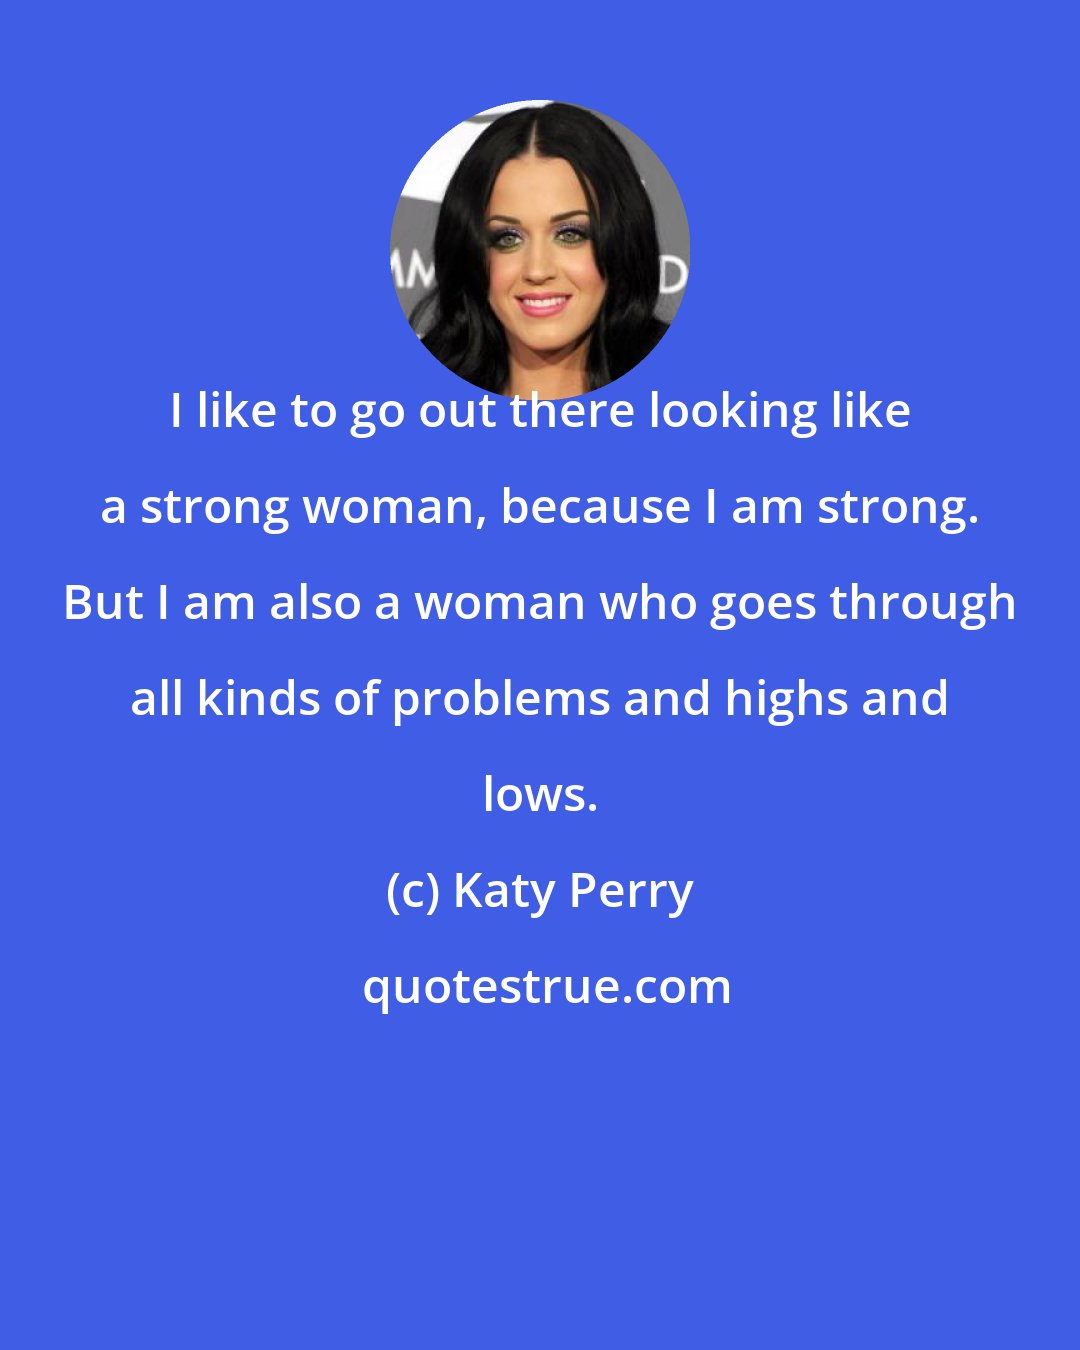 Katy Perry: I like to go out there looking like a strong woman, because I am strong. But I am also a woman who goes through all kinds of problems and highs and lows.